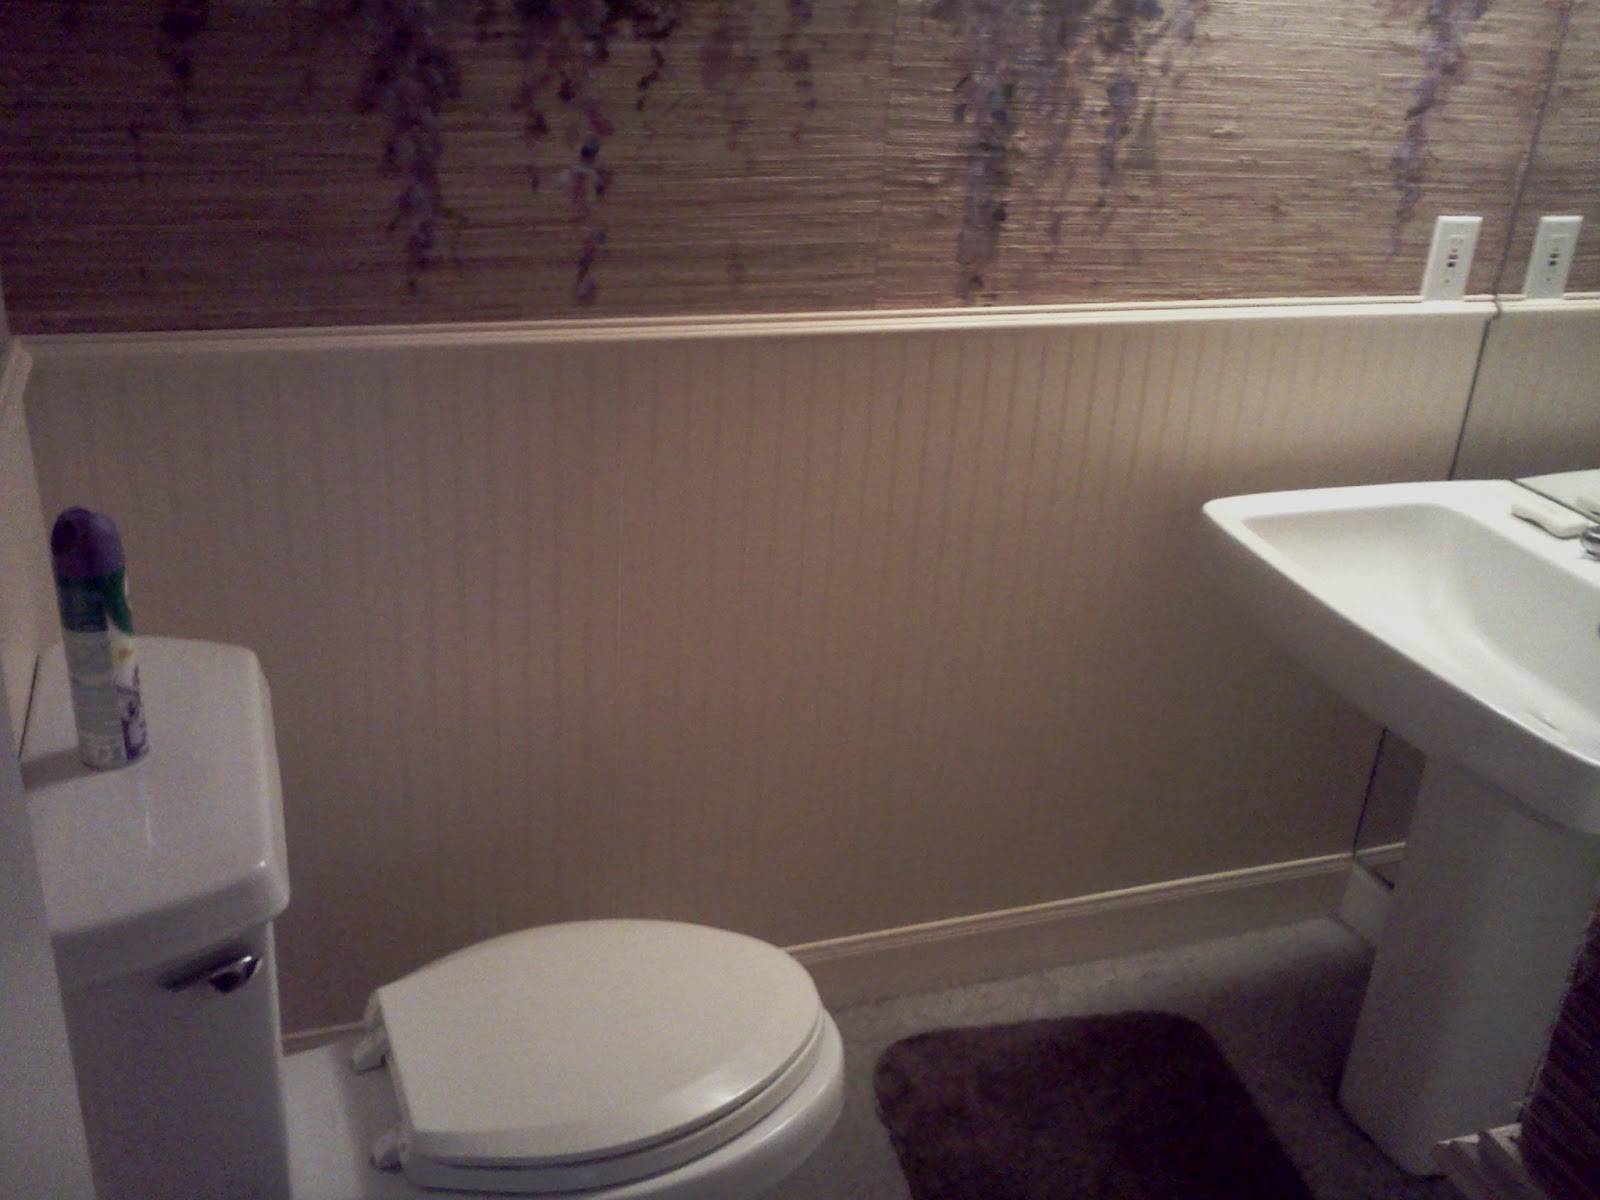 Result: Damage covered in a decorative wainscoting, making this small ...